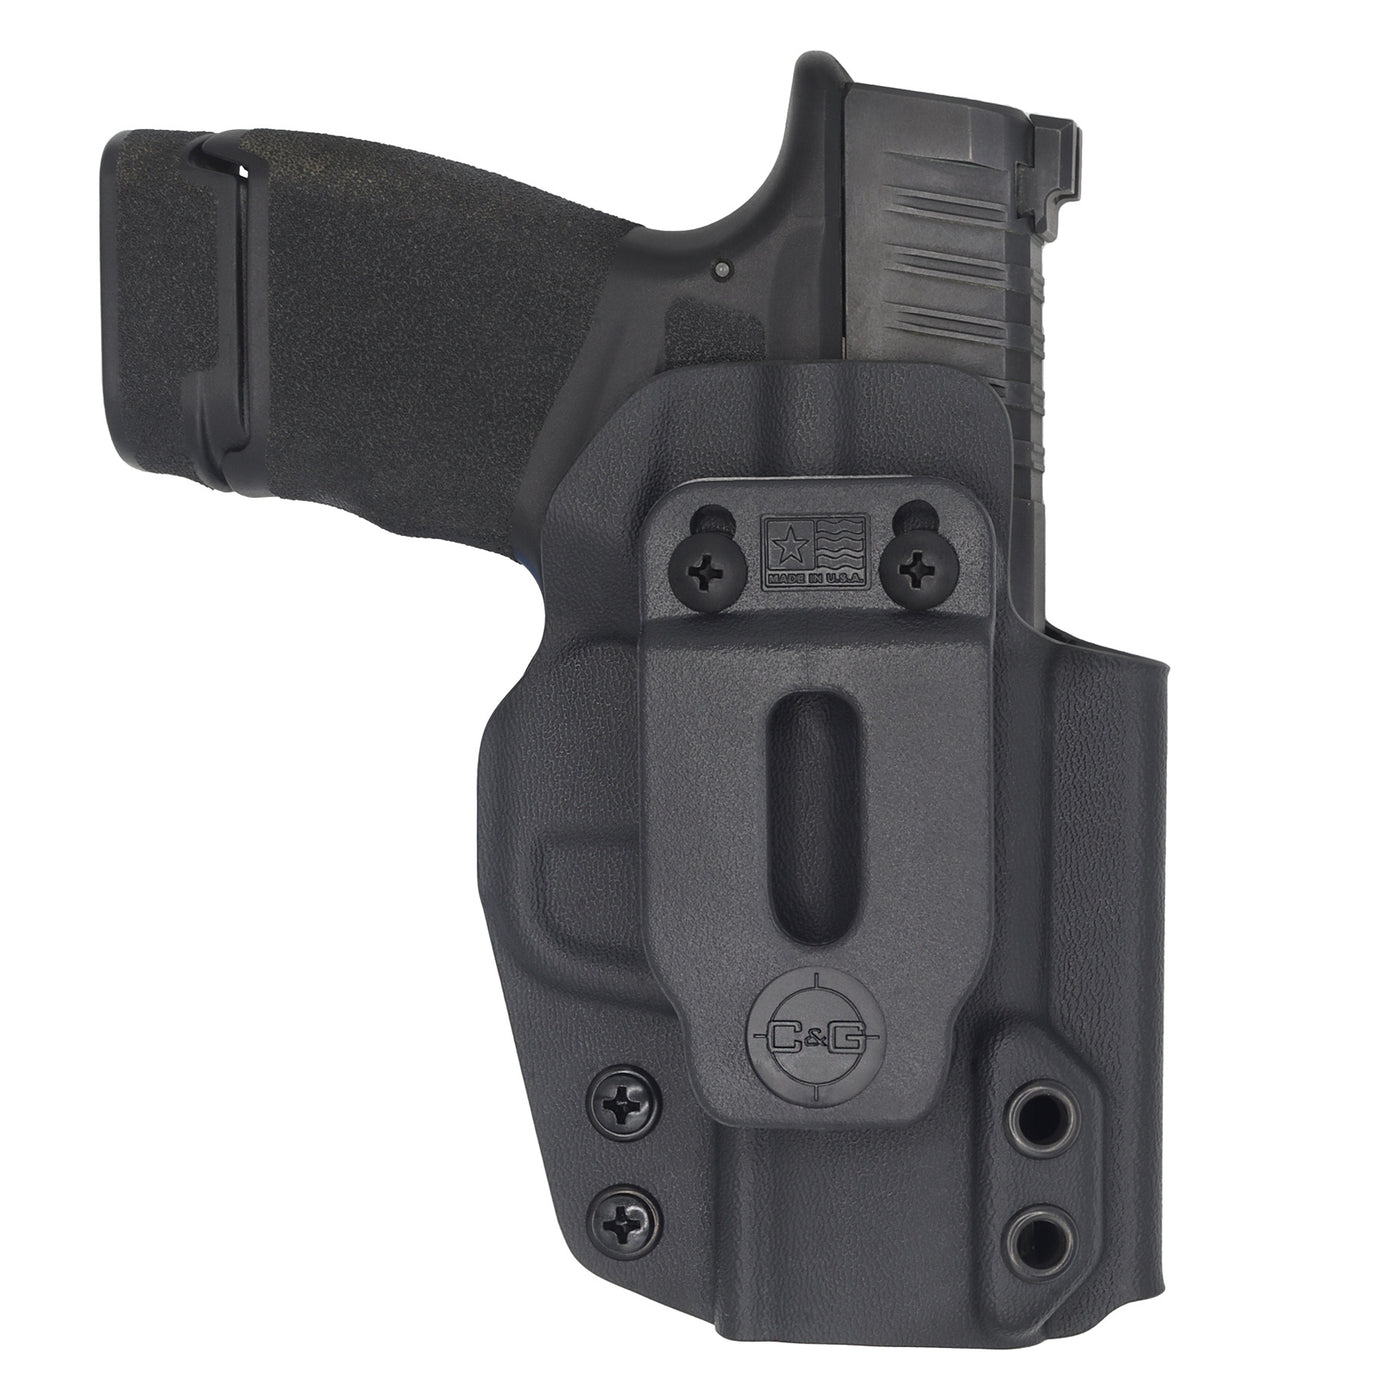 Springfield Hellcat IWB kydex holster made by C and G Holsters. Photo is of the front showing the branded belt clip with the Hellcat in the holstered position